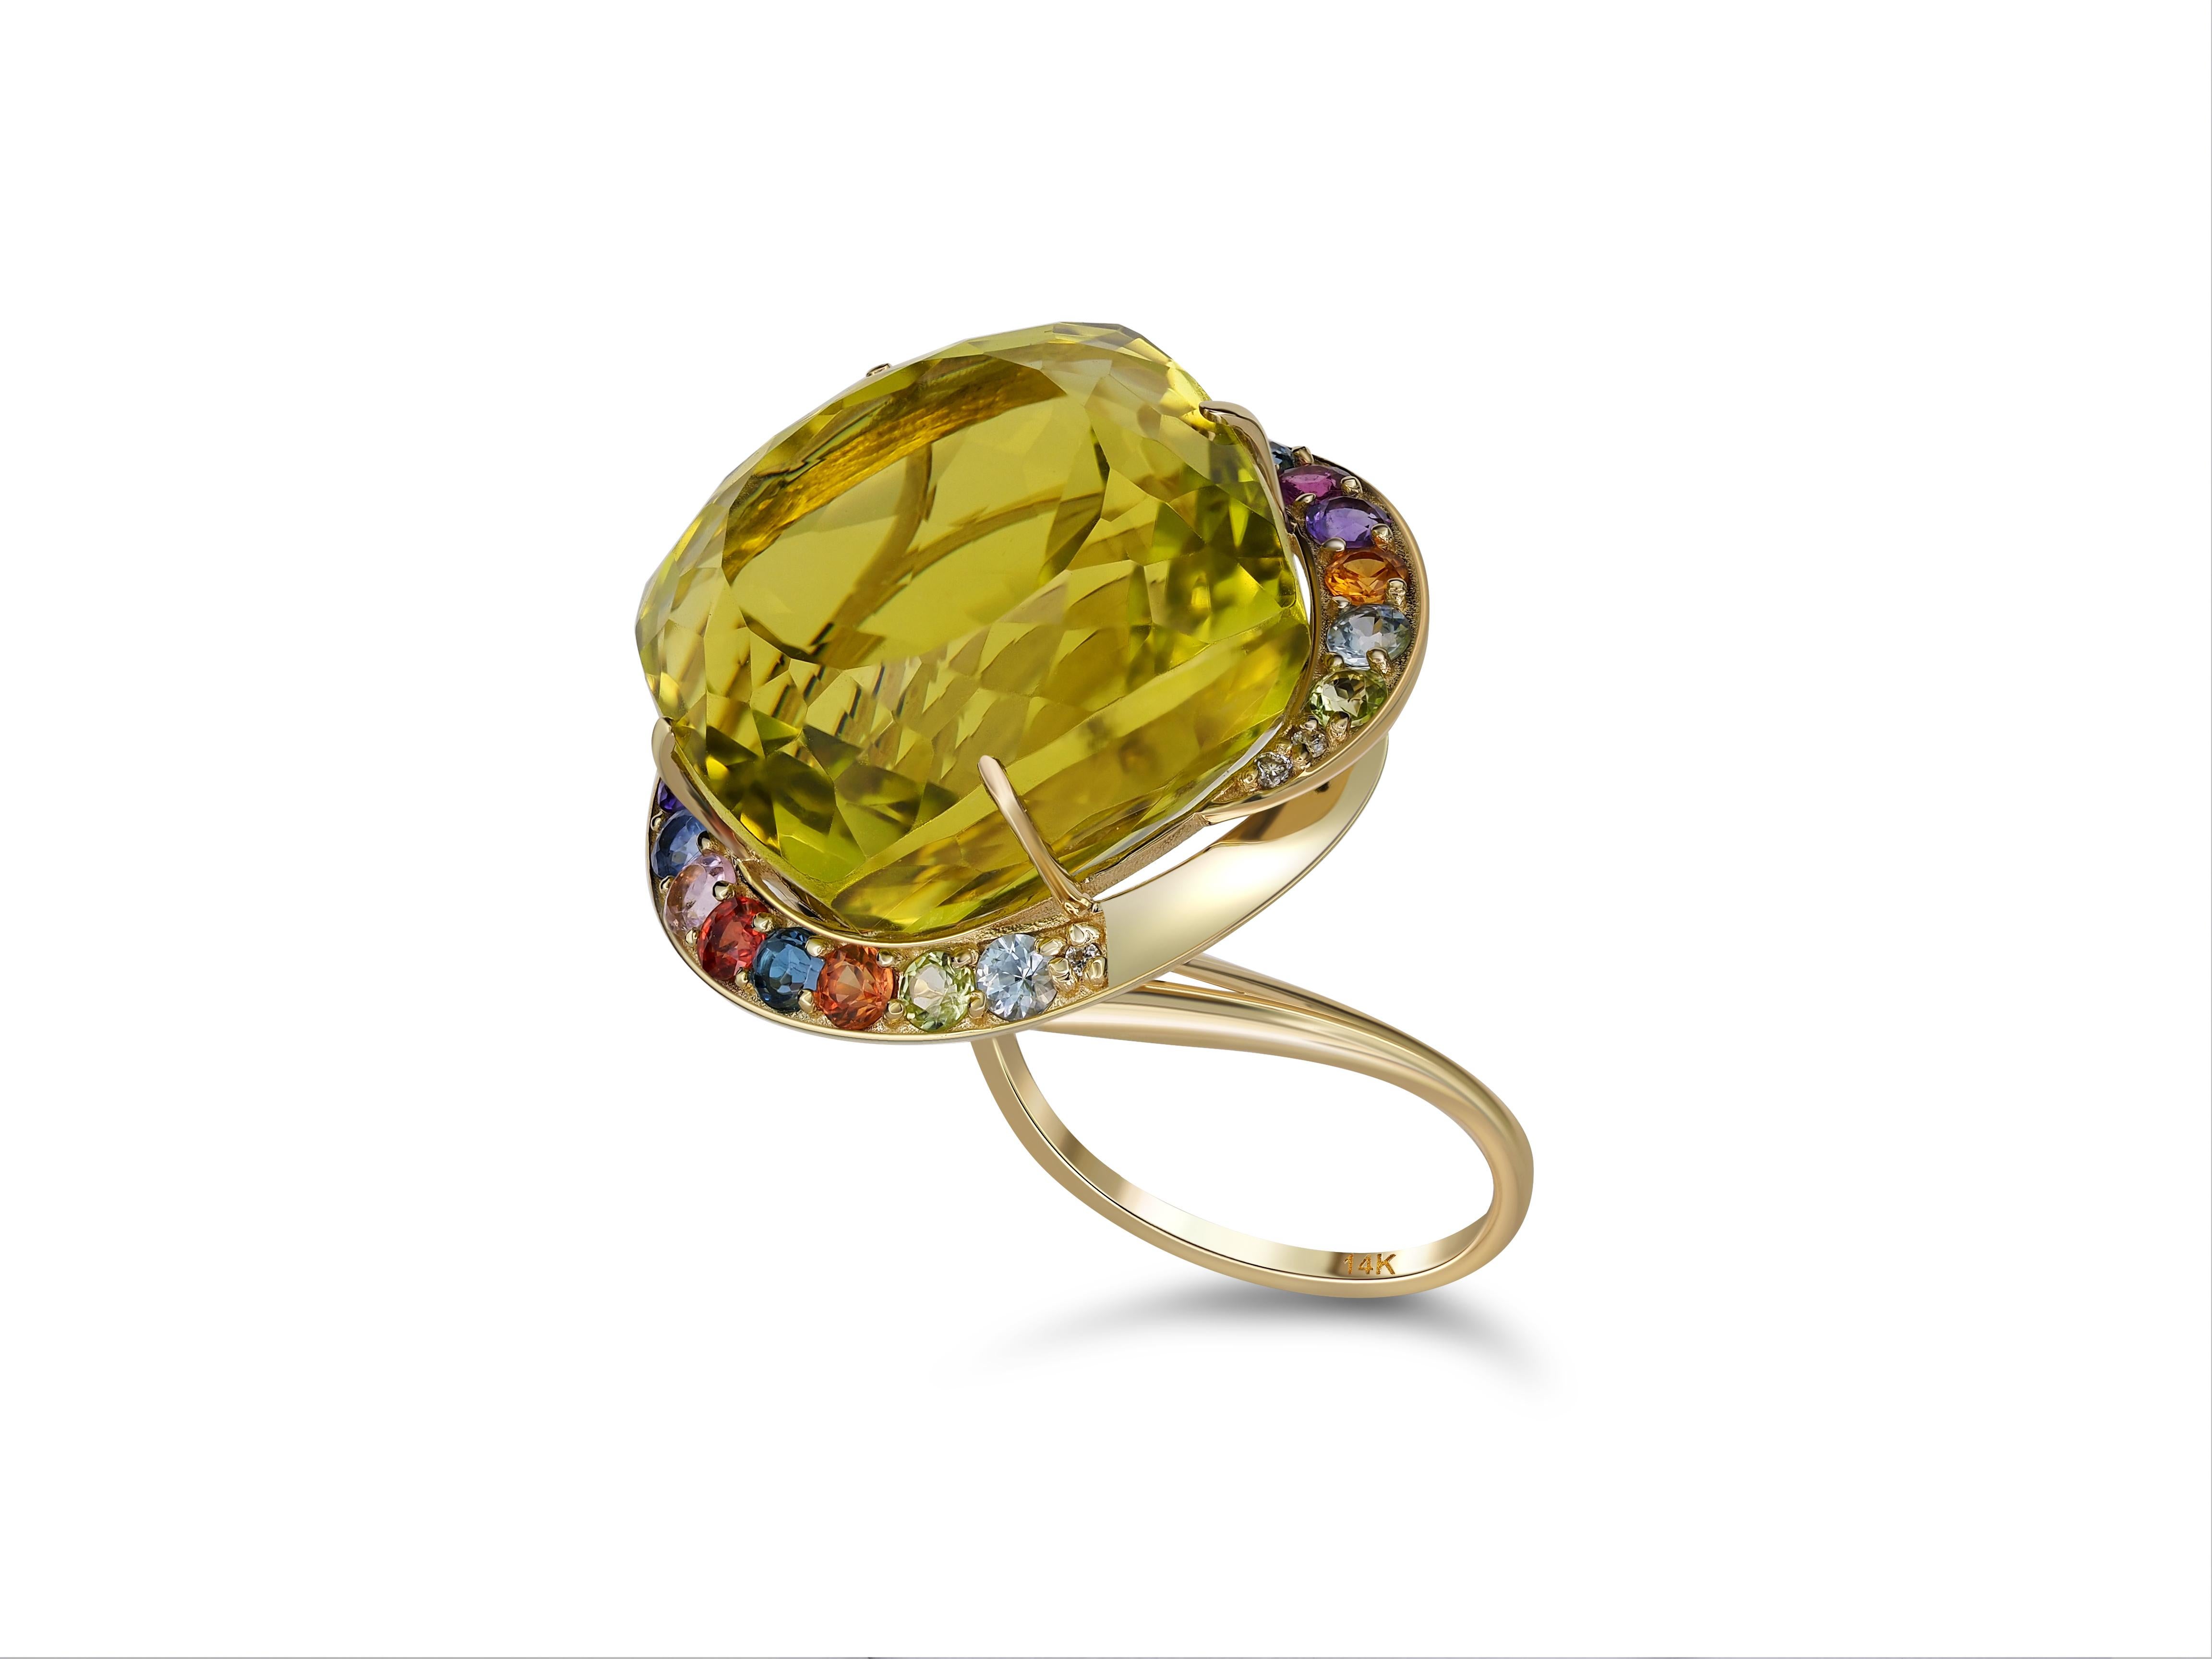 Cushion Cut Massive citrine ring with colored gemstones in 14 kt gold. For Sale